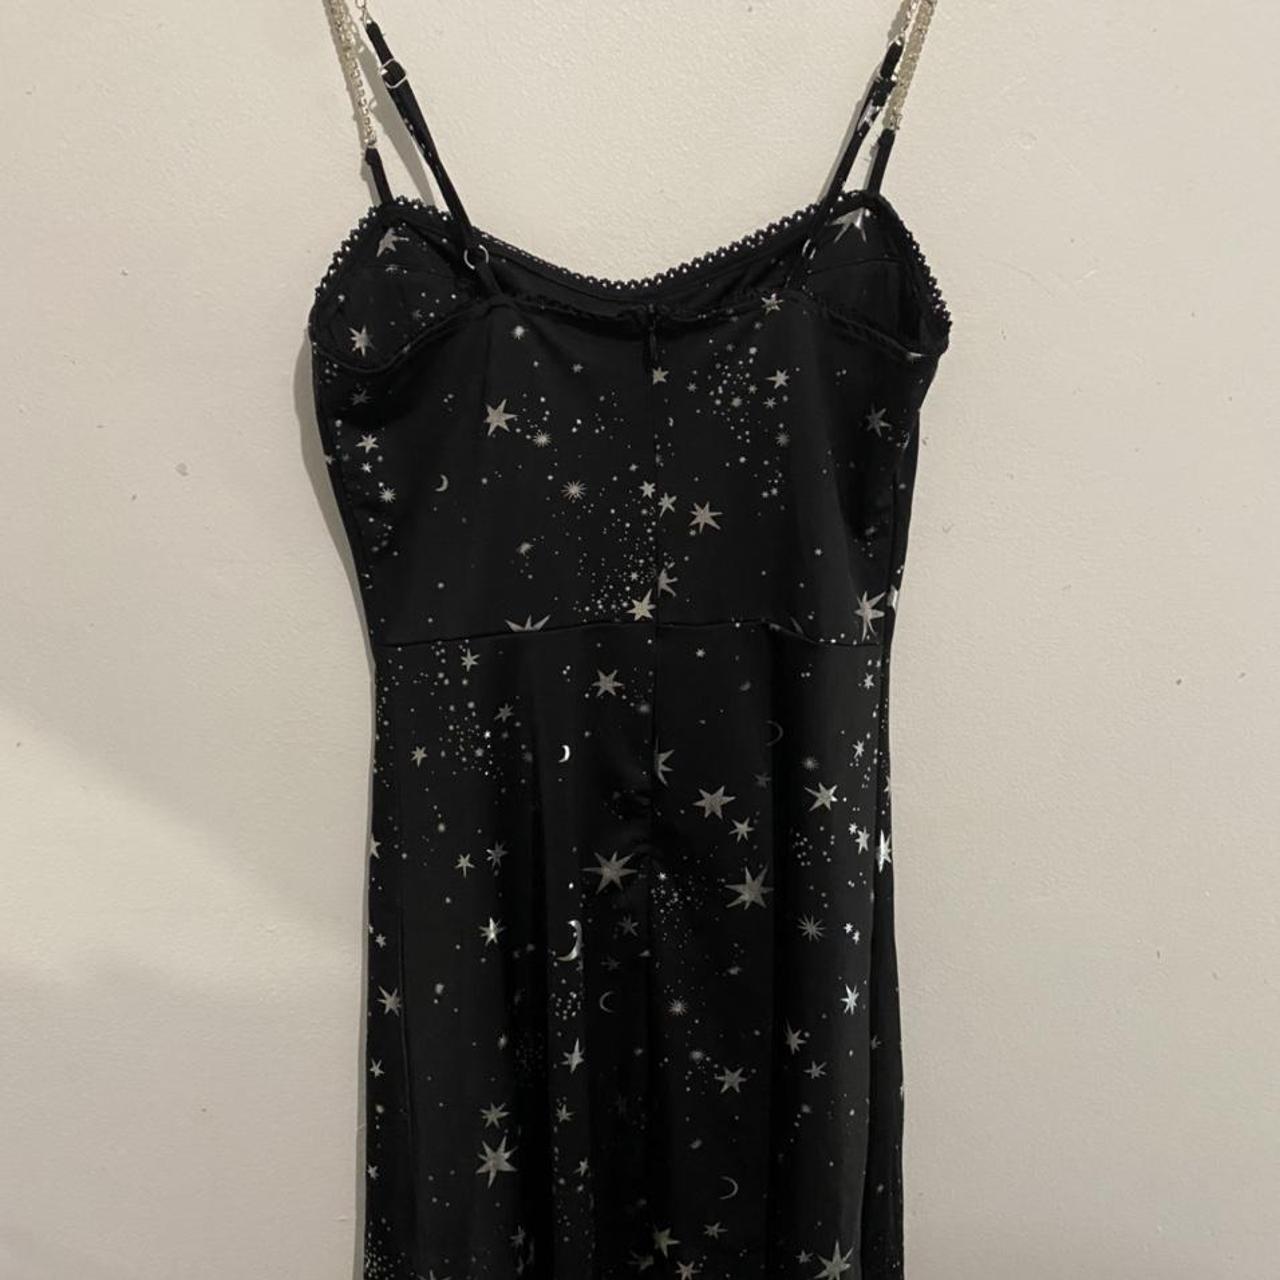 Beautiful black dress with silver stars and moon,... - Depop